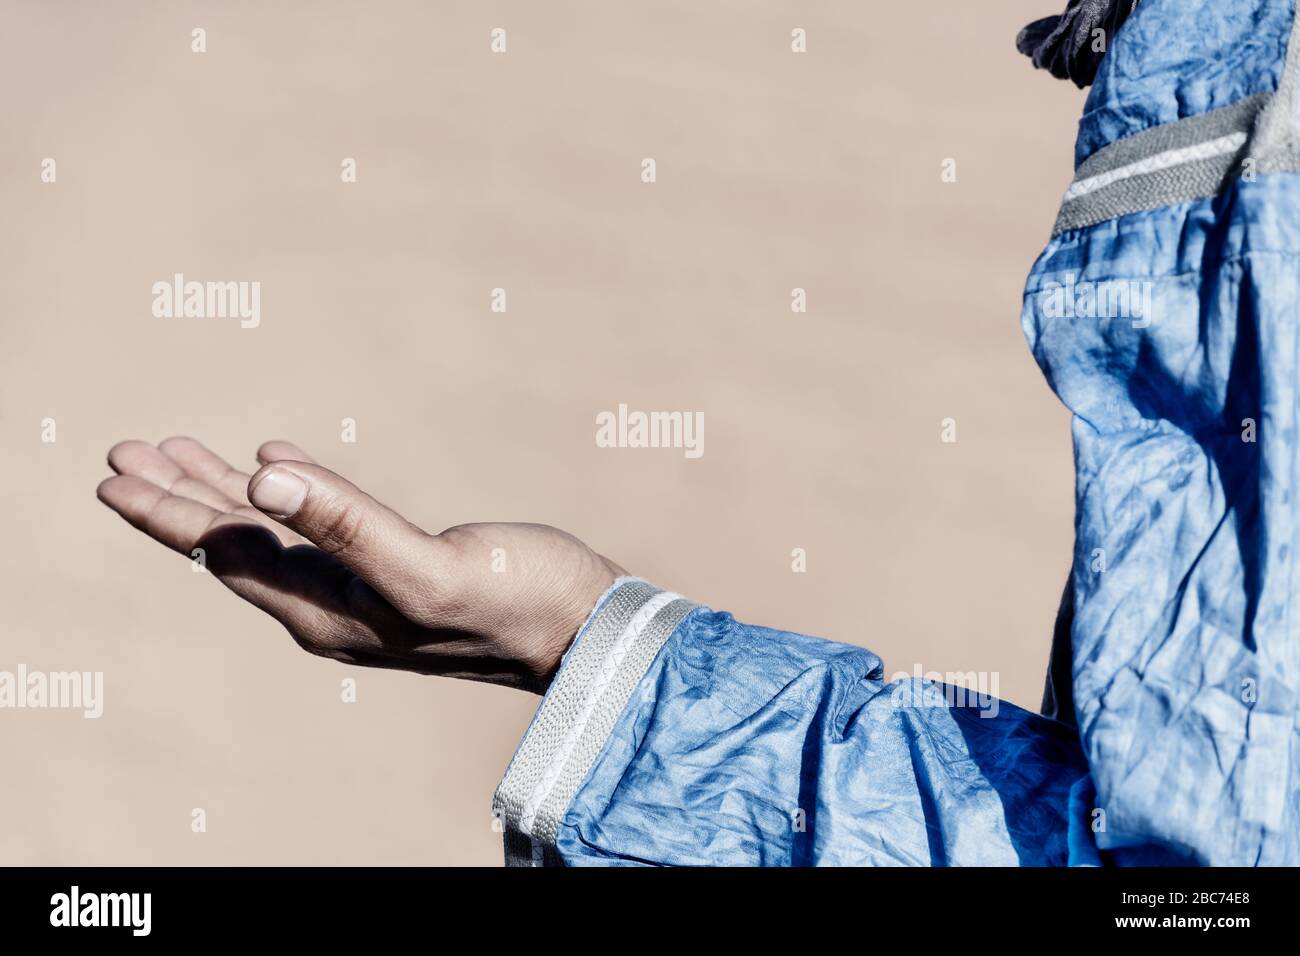 Open hand of a traditional dressed Moroccan man. High key image with muted colors. Stock Photo